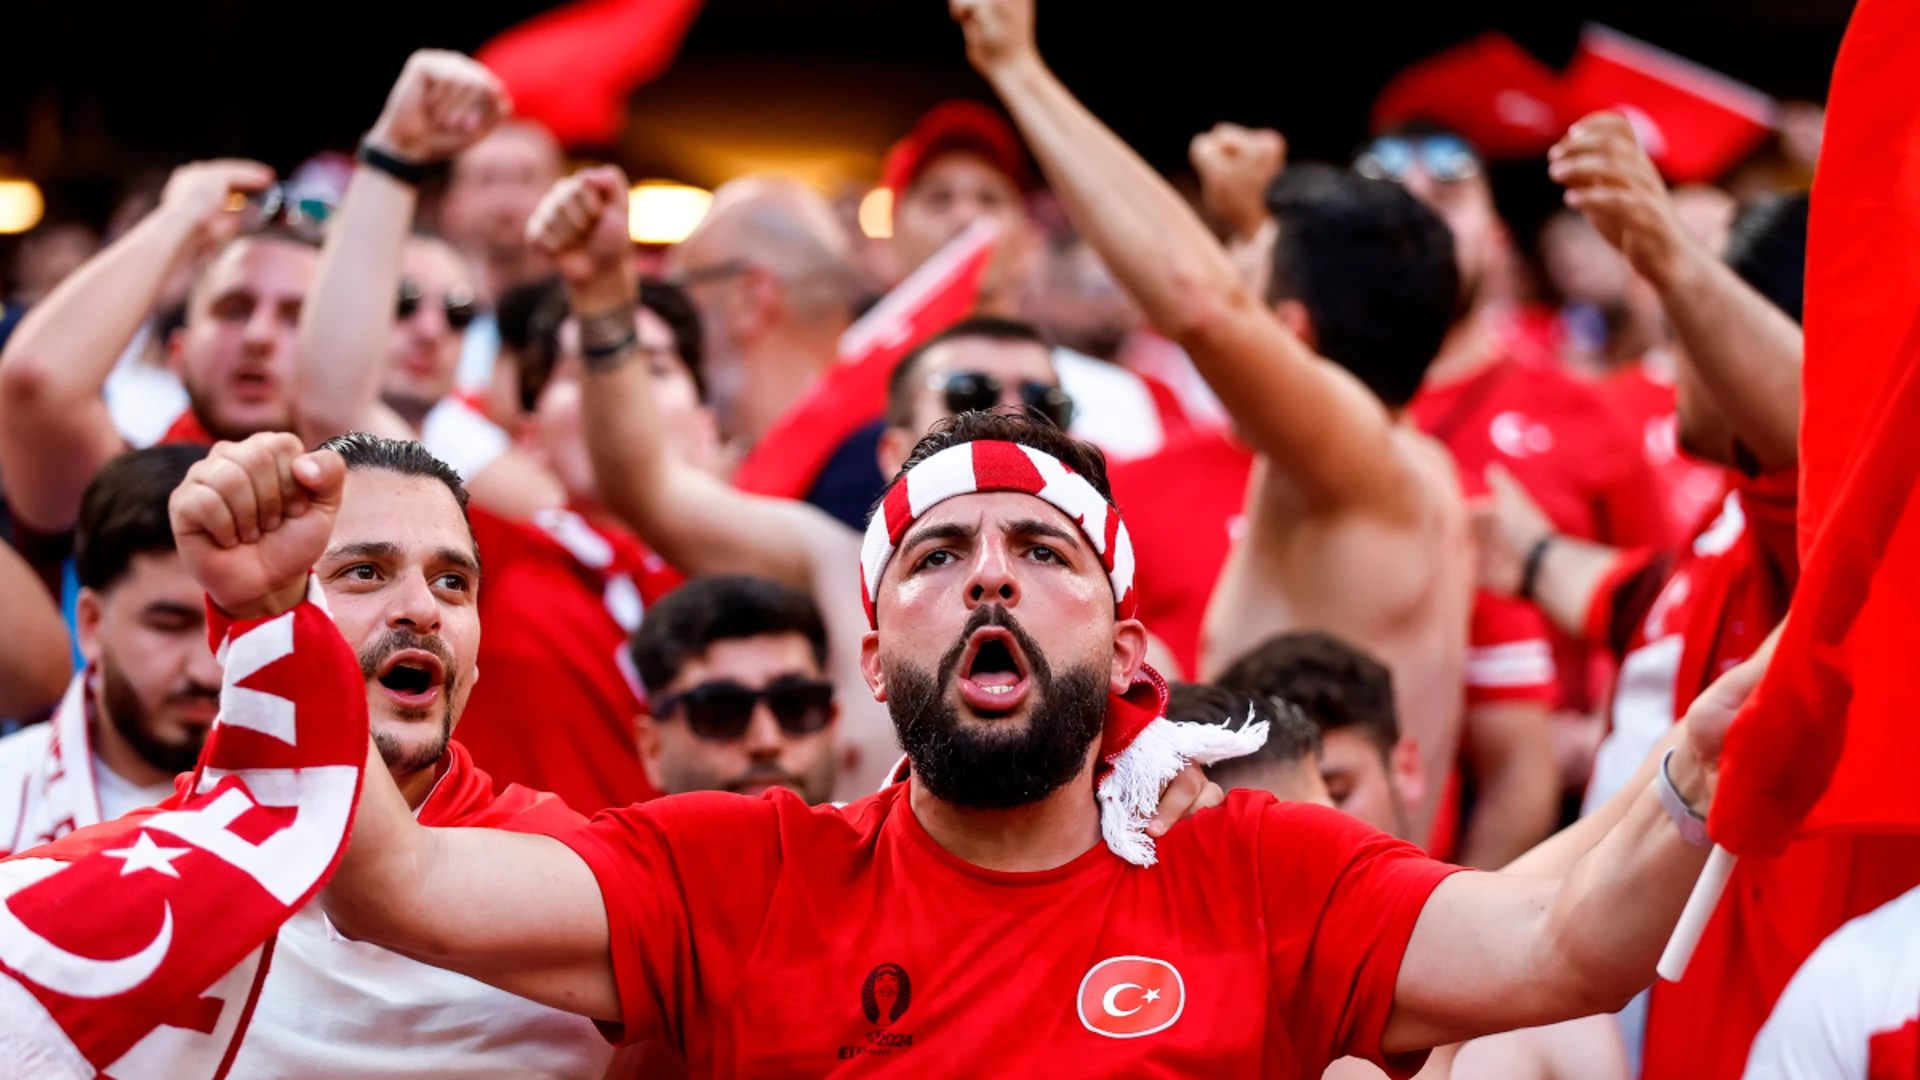 Berlin's Turks stoked for Euros quarterfinal 'home game'